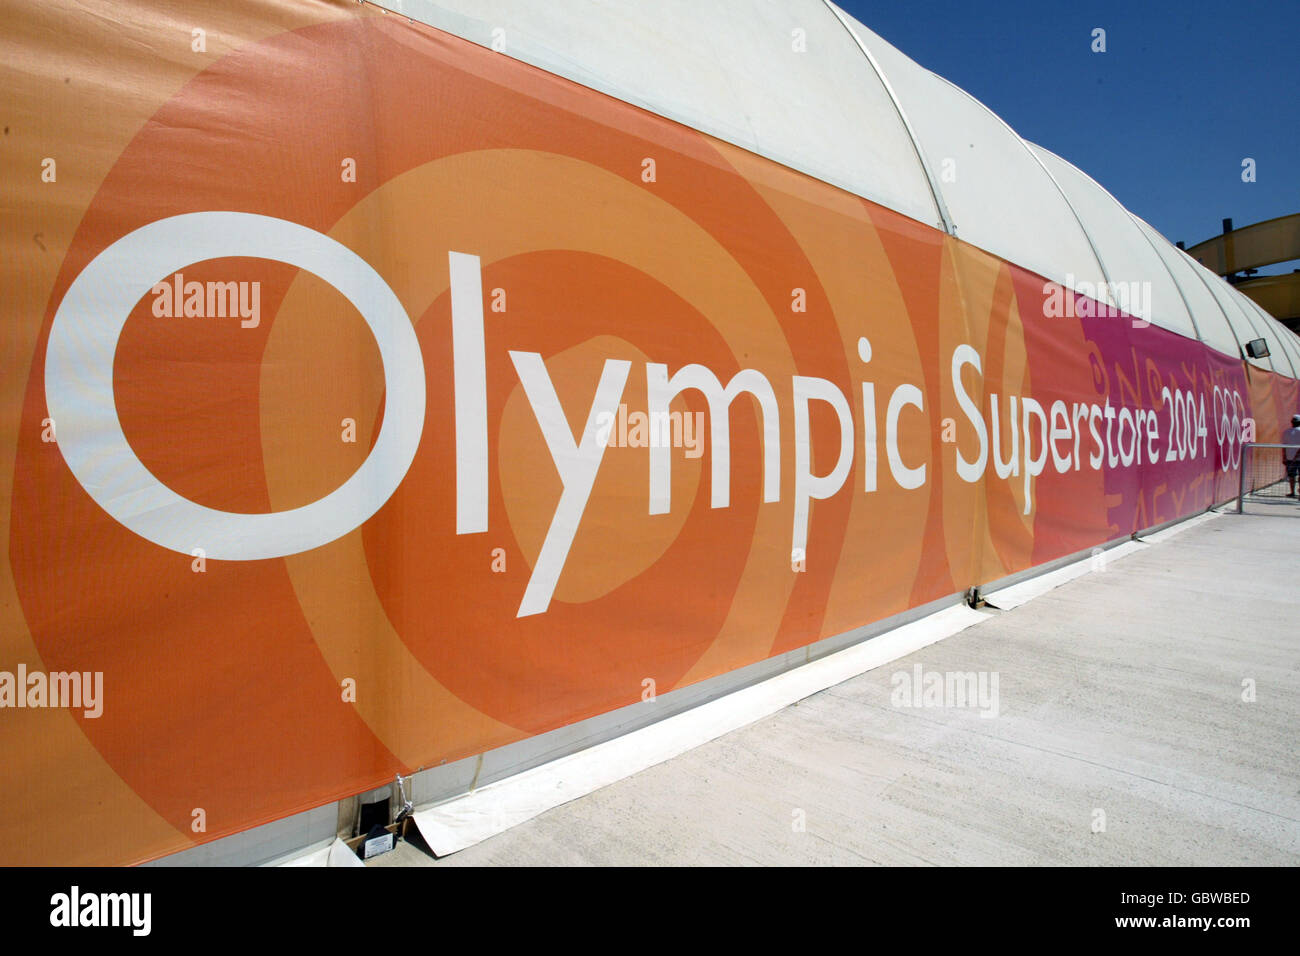 Athens Olympic Games 2004. The Olympic Superstore Stock Photo